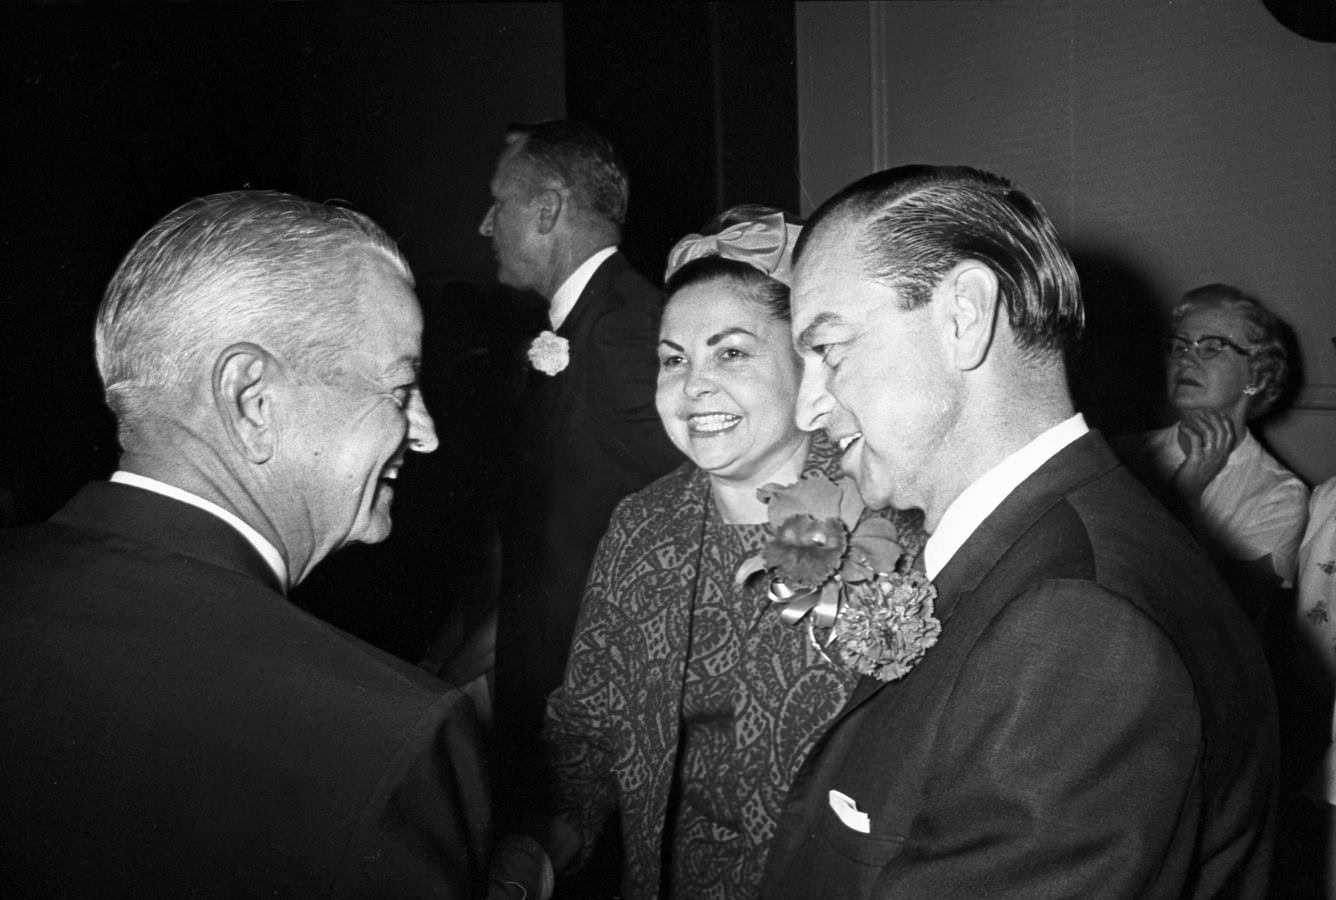 Arlington Mayor Tom J. Vandergriff and his wife, Anna, conversing with an attendee of an appreciation dinner held in Vandergriff's honor in Hotel Texas' Grand Ballroom, 1966